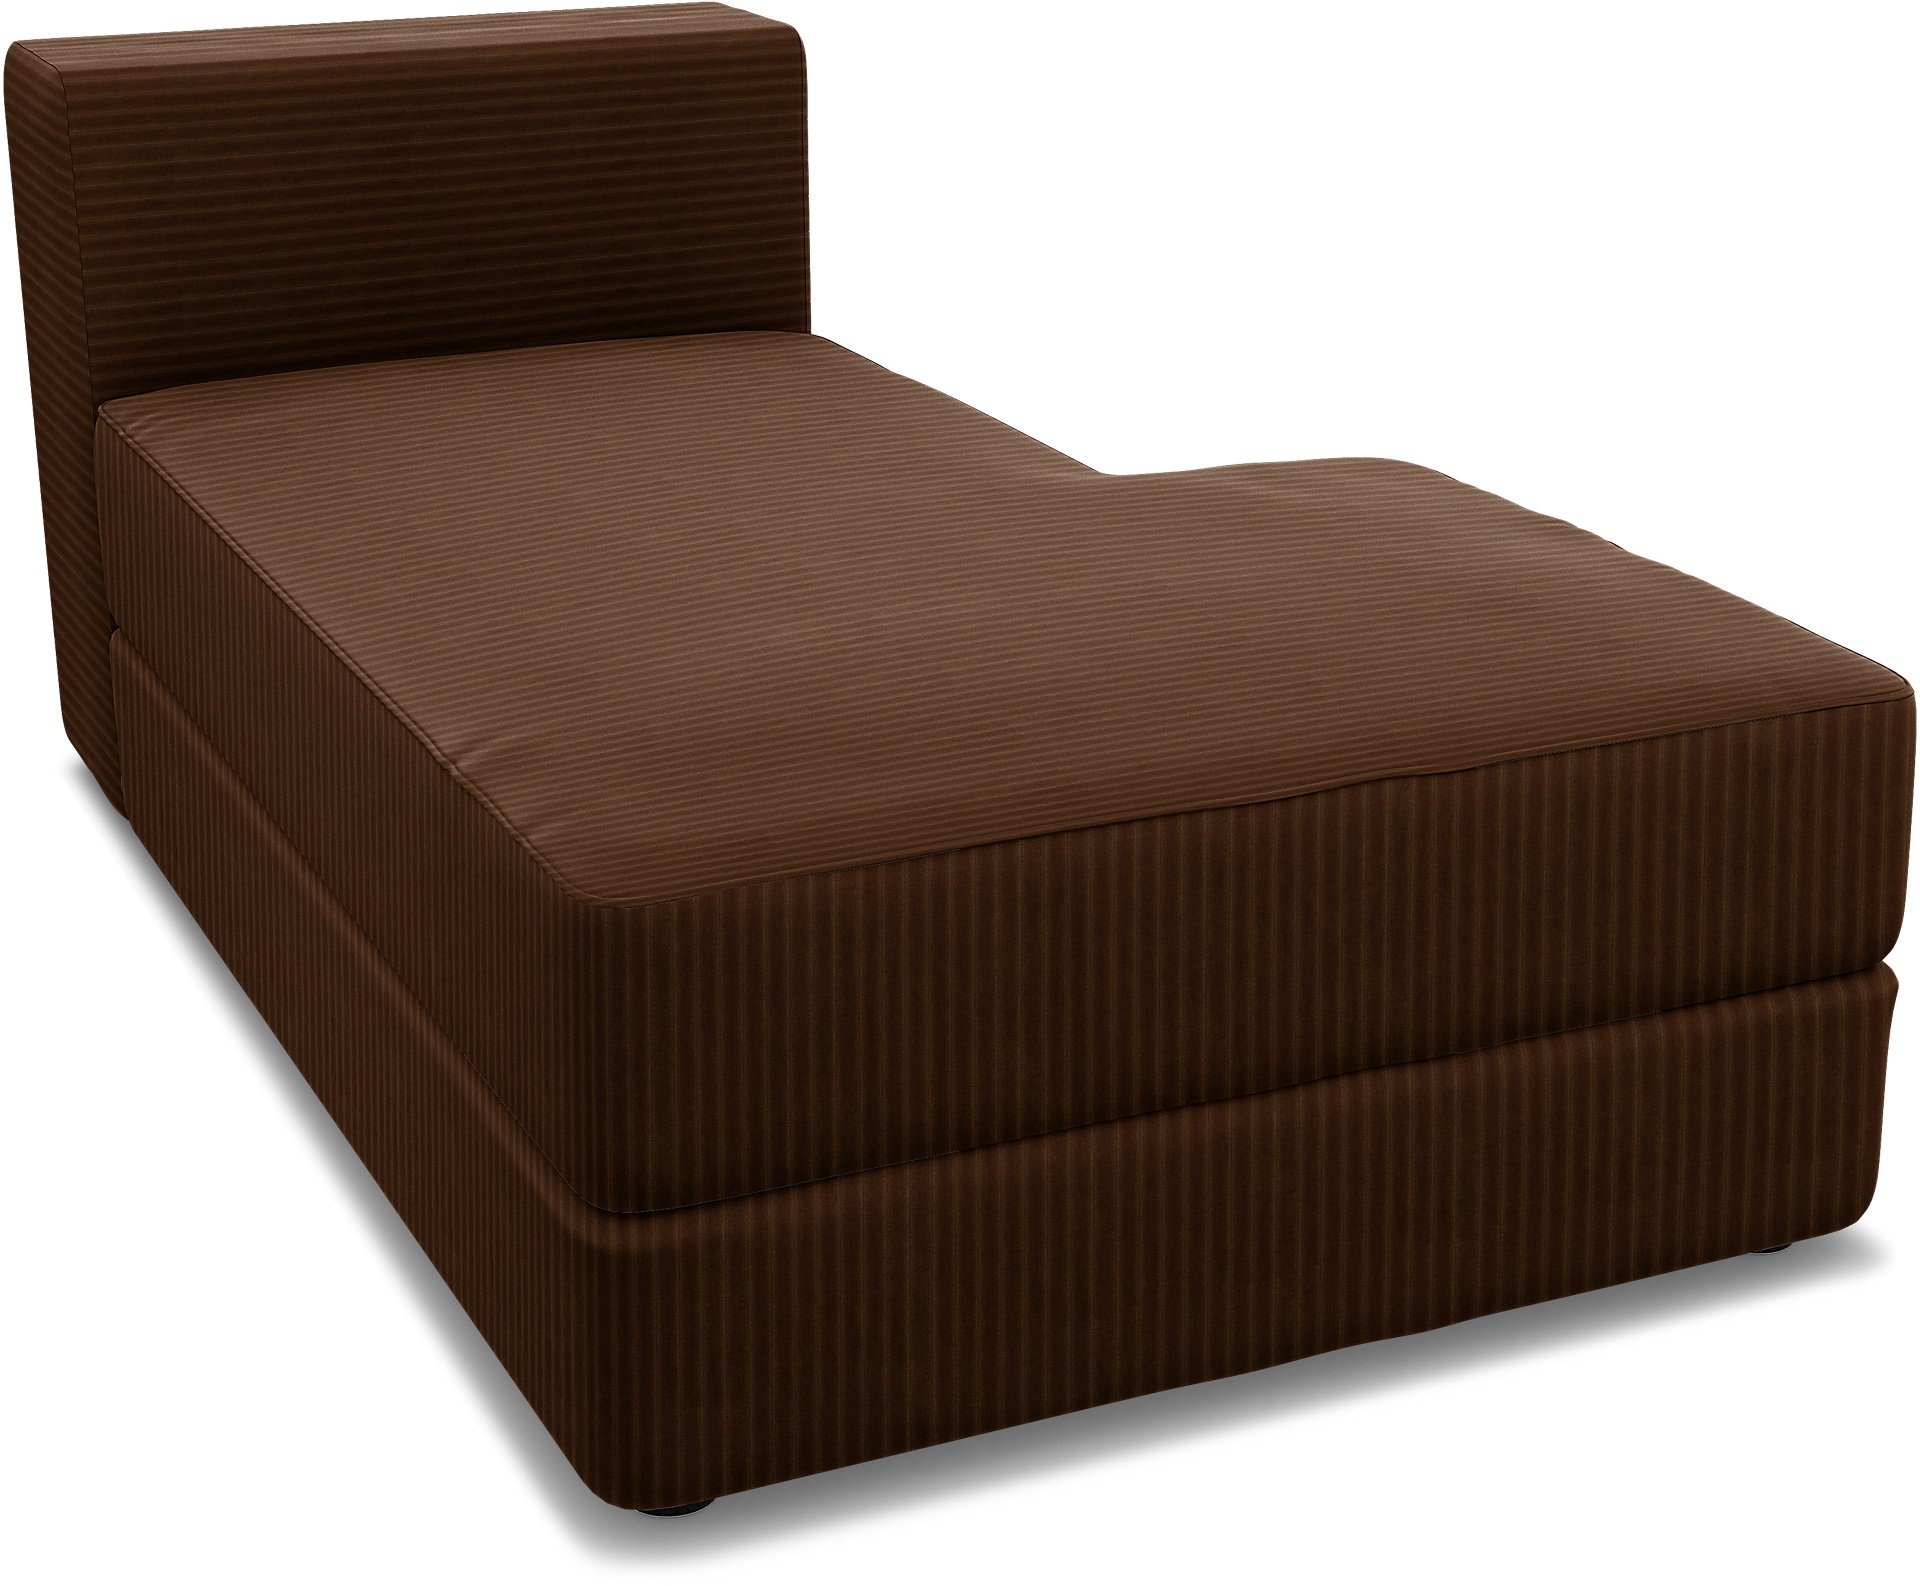 IKEA - Jattebo Chaise Module Cover (right), Chocolate Brown, Corduroy - Bemz